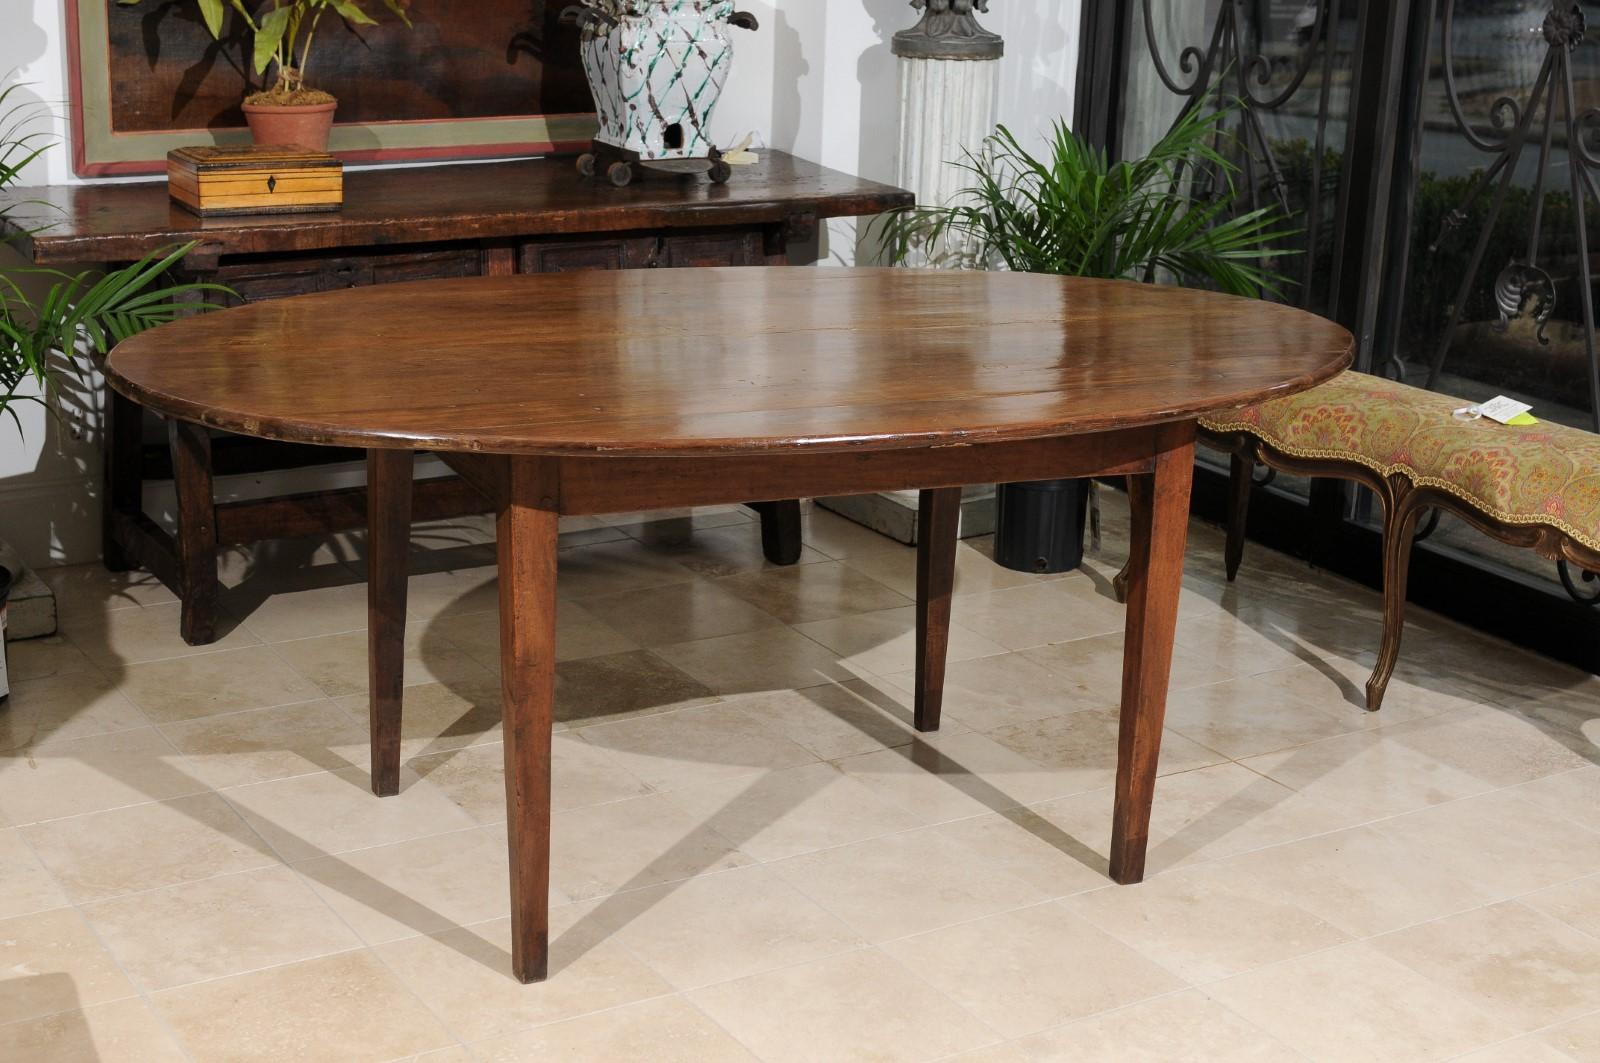  French Oval Farm Table with Tapered Legs 6